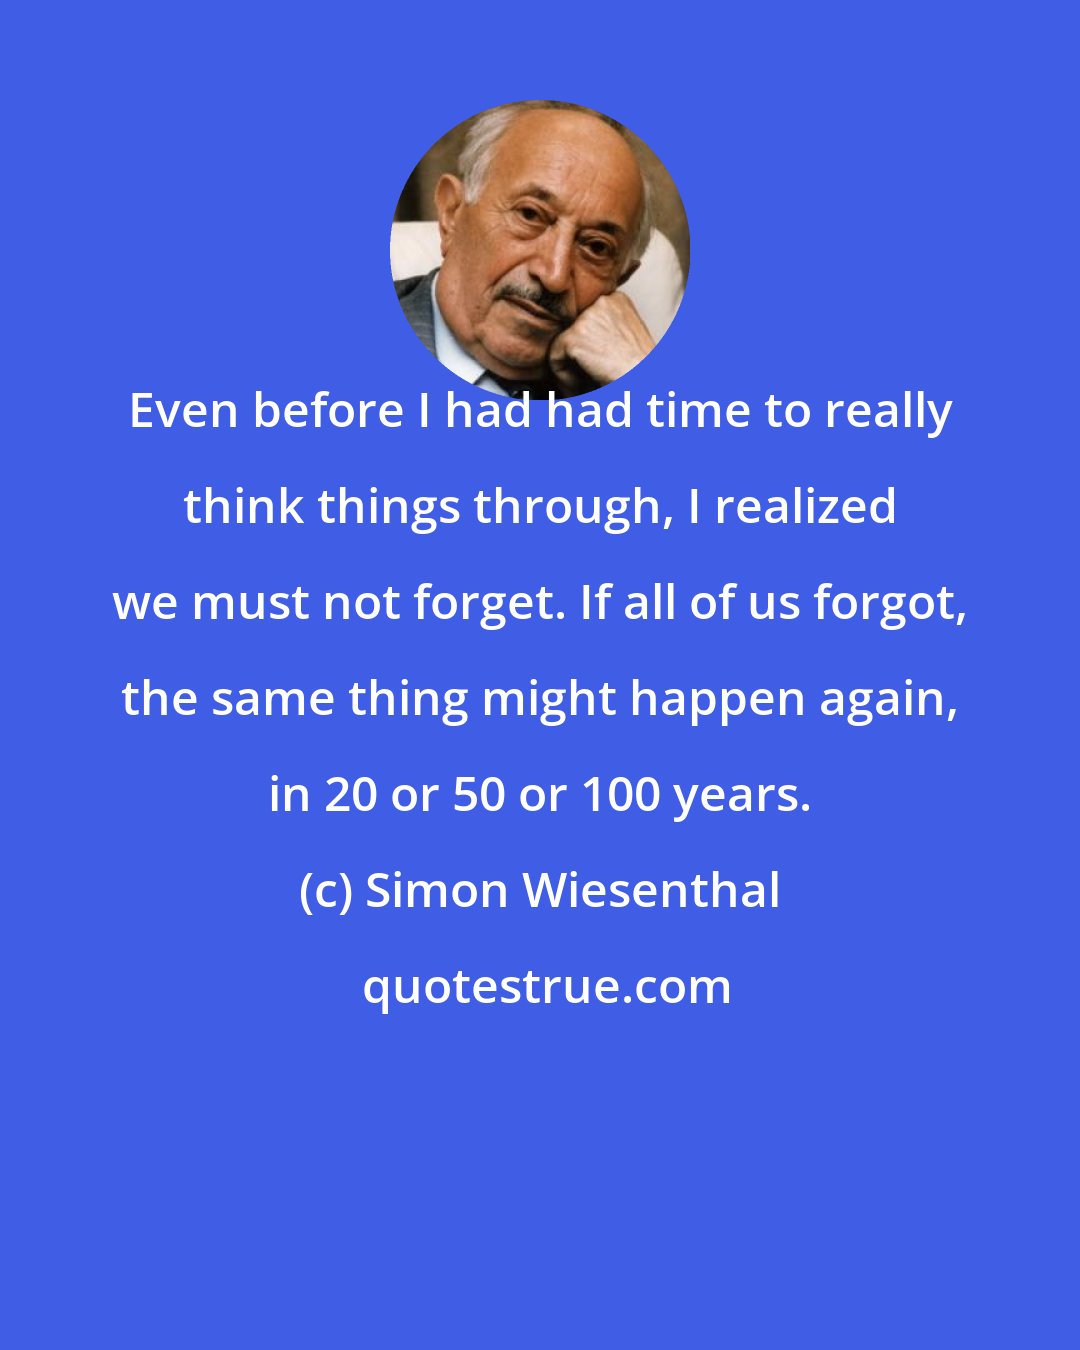 Simon Wiesenthal: Even before I had had time to really think things through, I realized we must not forget. If all of us forgot, the same thing might happen again, in 20 or 50 or 100 years.